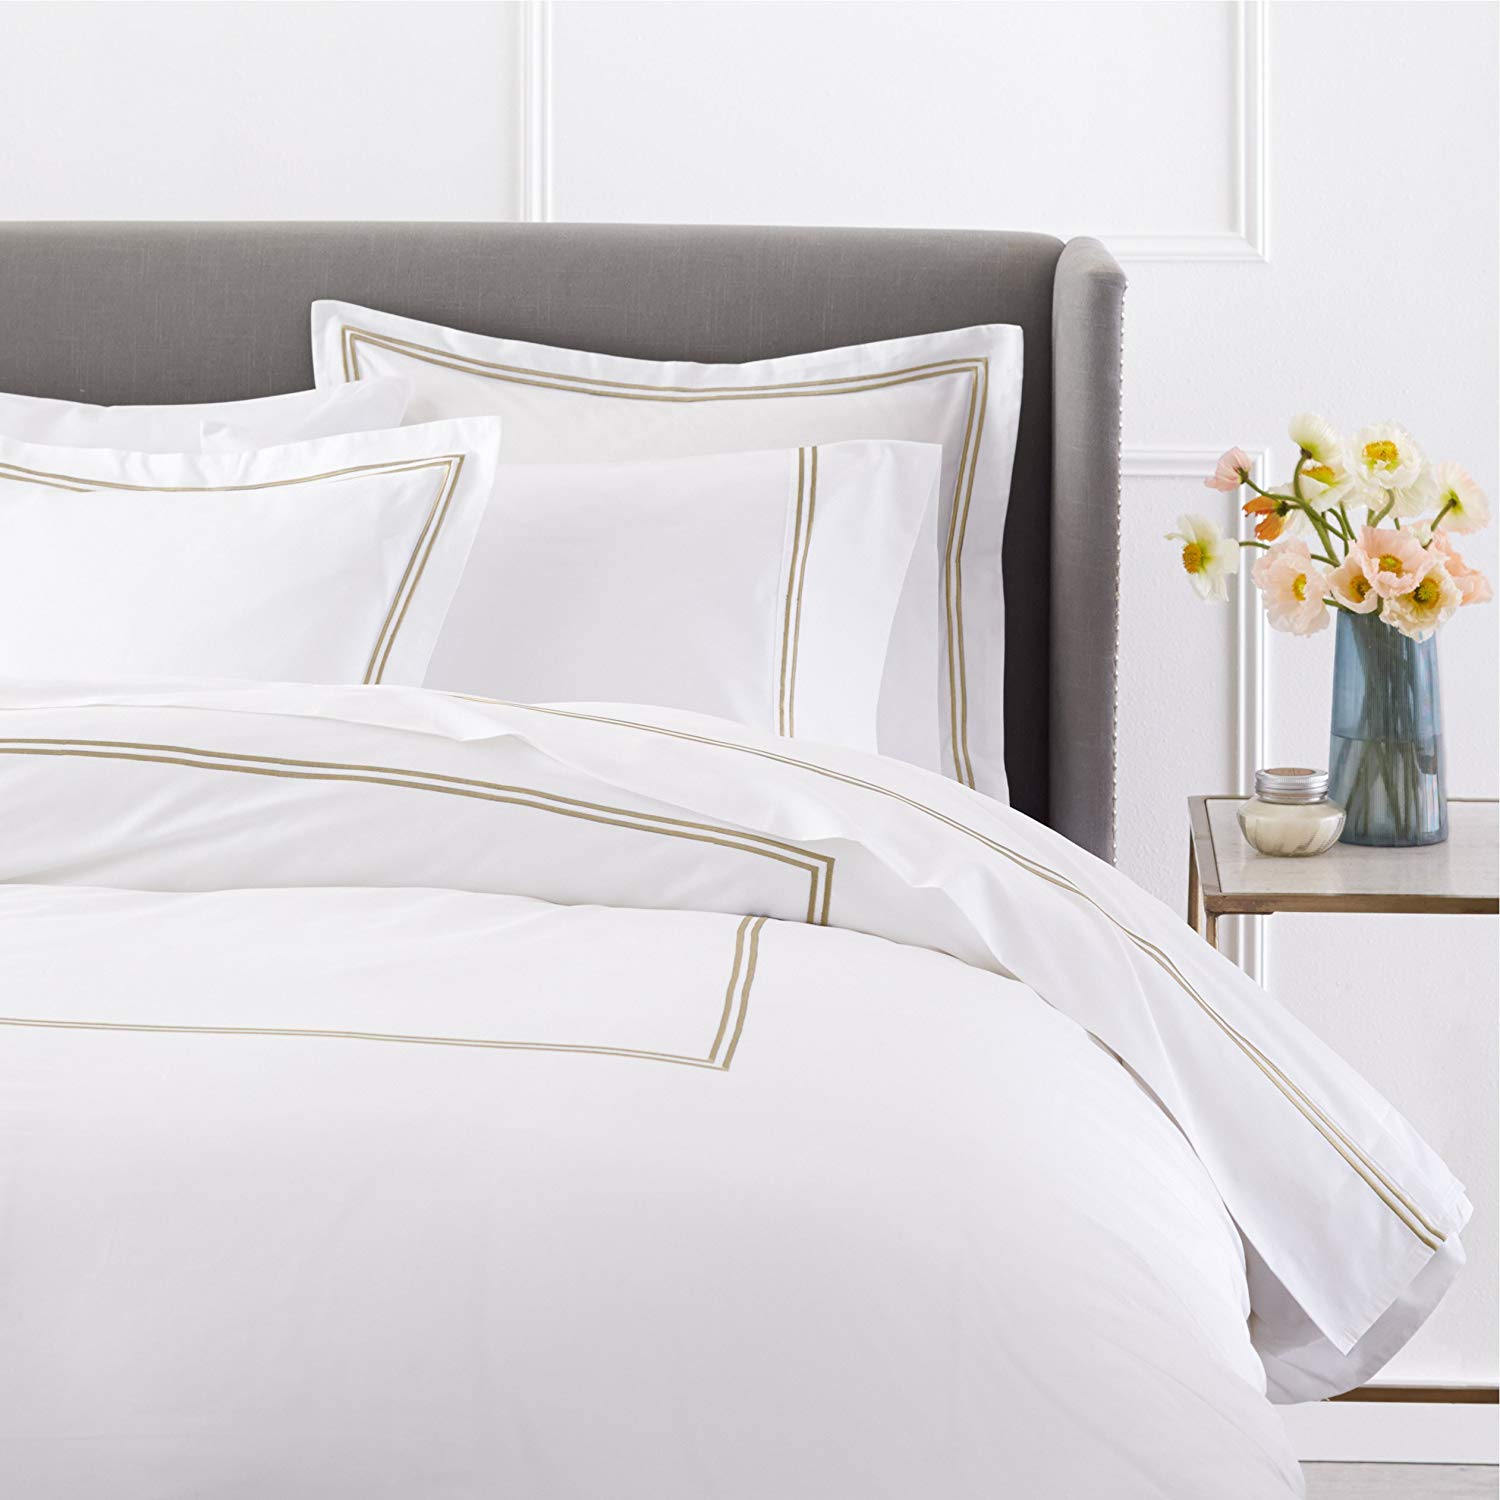 a Hotel Stitch duvet cover set from Pinzon